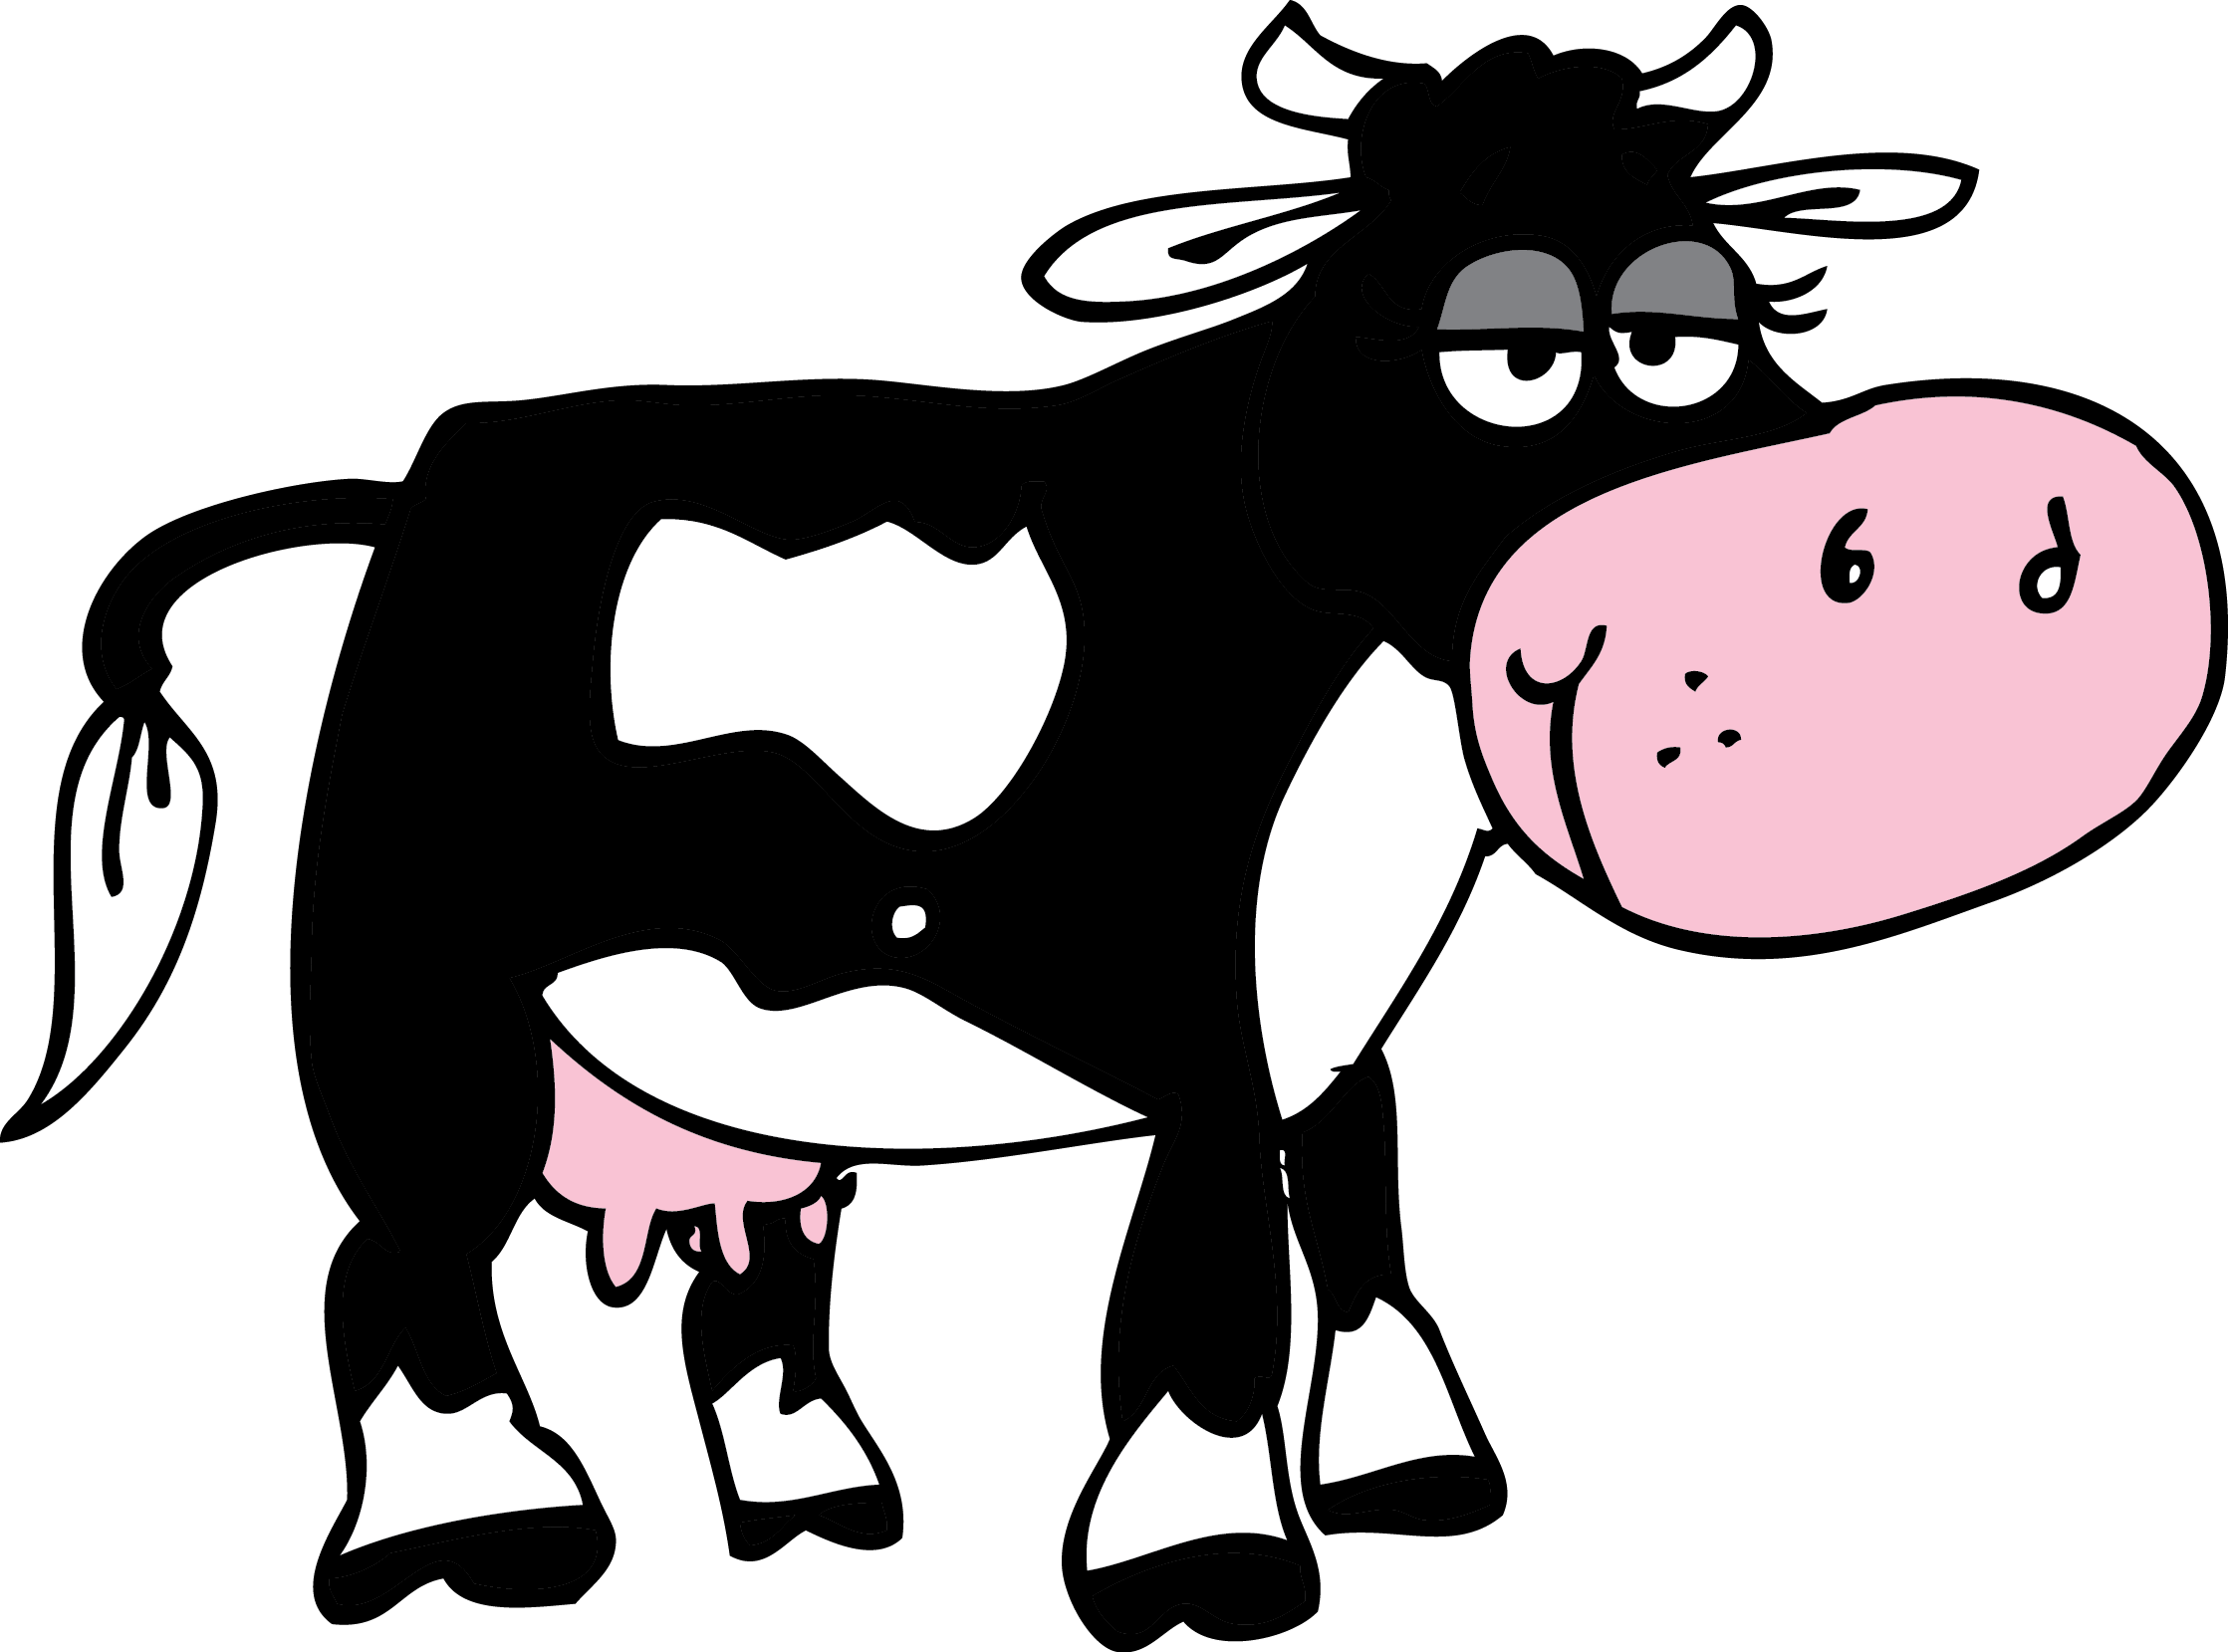 Working clipart paired. Cartoon cow jumping images